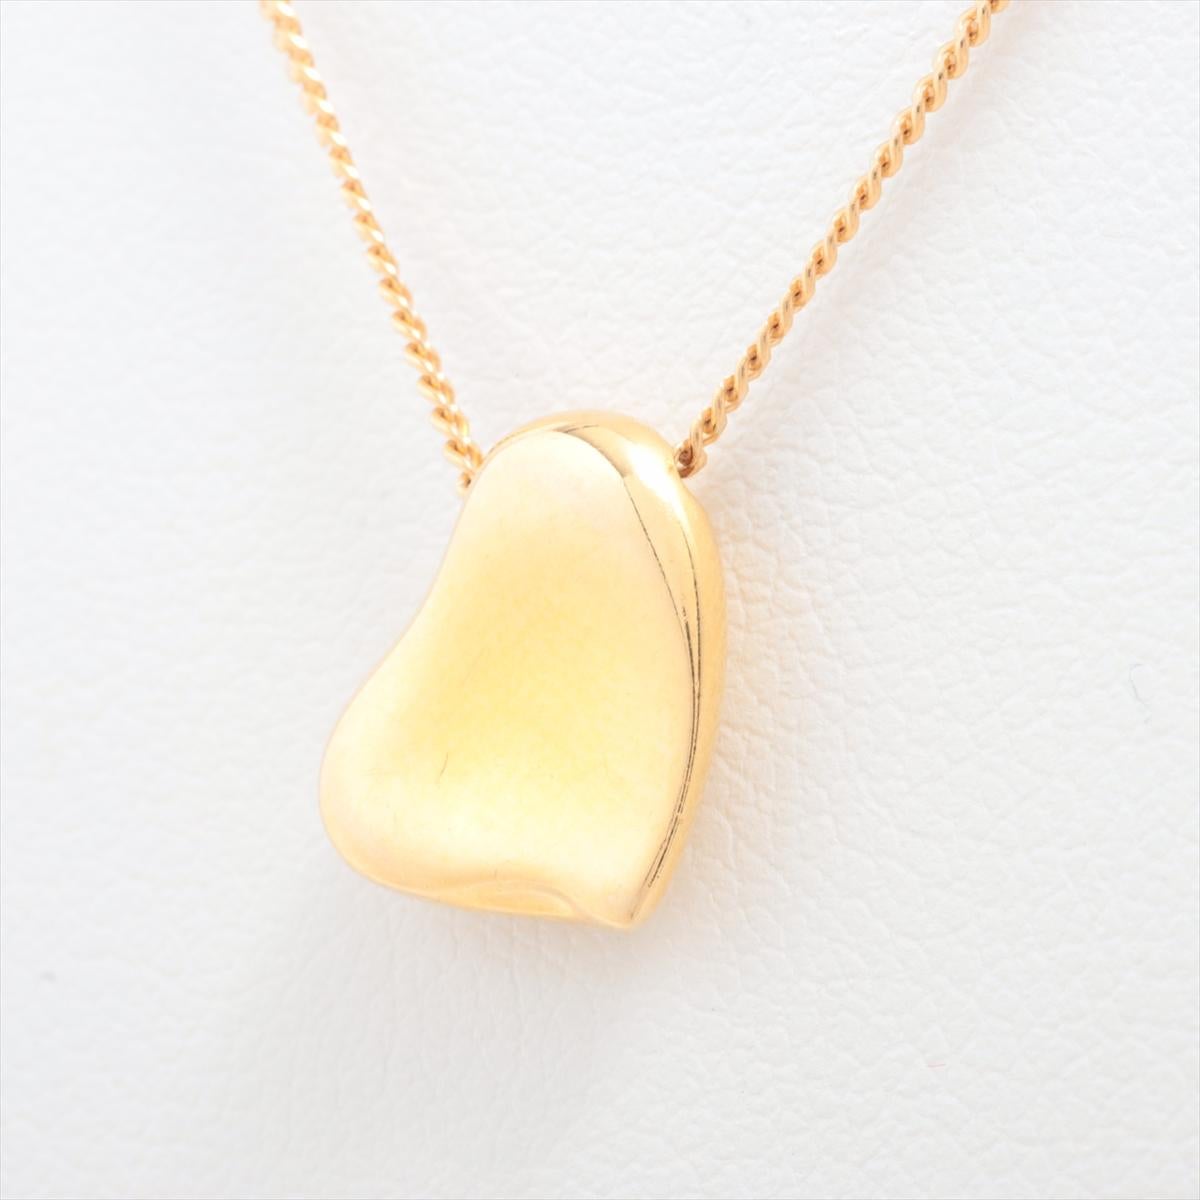 The Tiffany & Co. Elsa Peretti Full Heart Pendant Necklace in Gold is a timeless and elegant piece of jewelry that exudes sophistication and charm. Designed by renowned designer Elsa Peretti, the necklace features a delicate full heart pendant